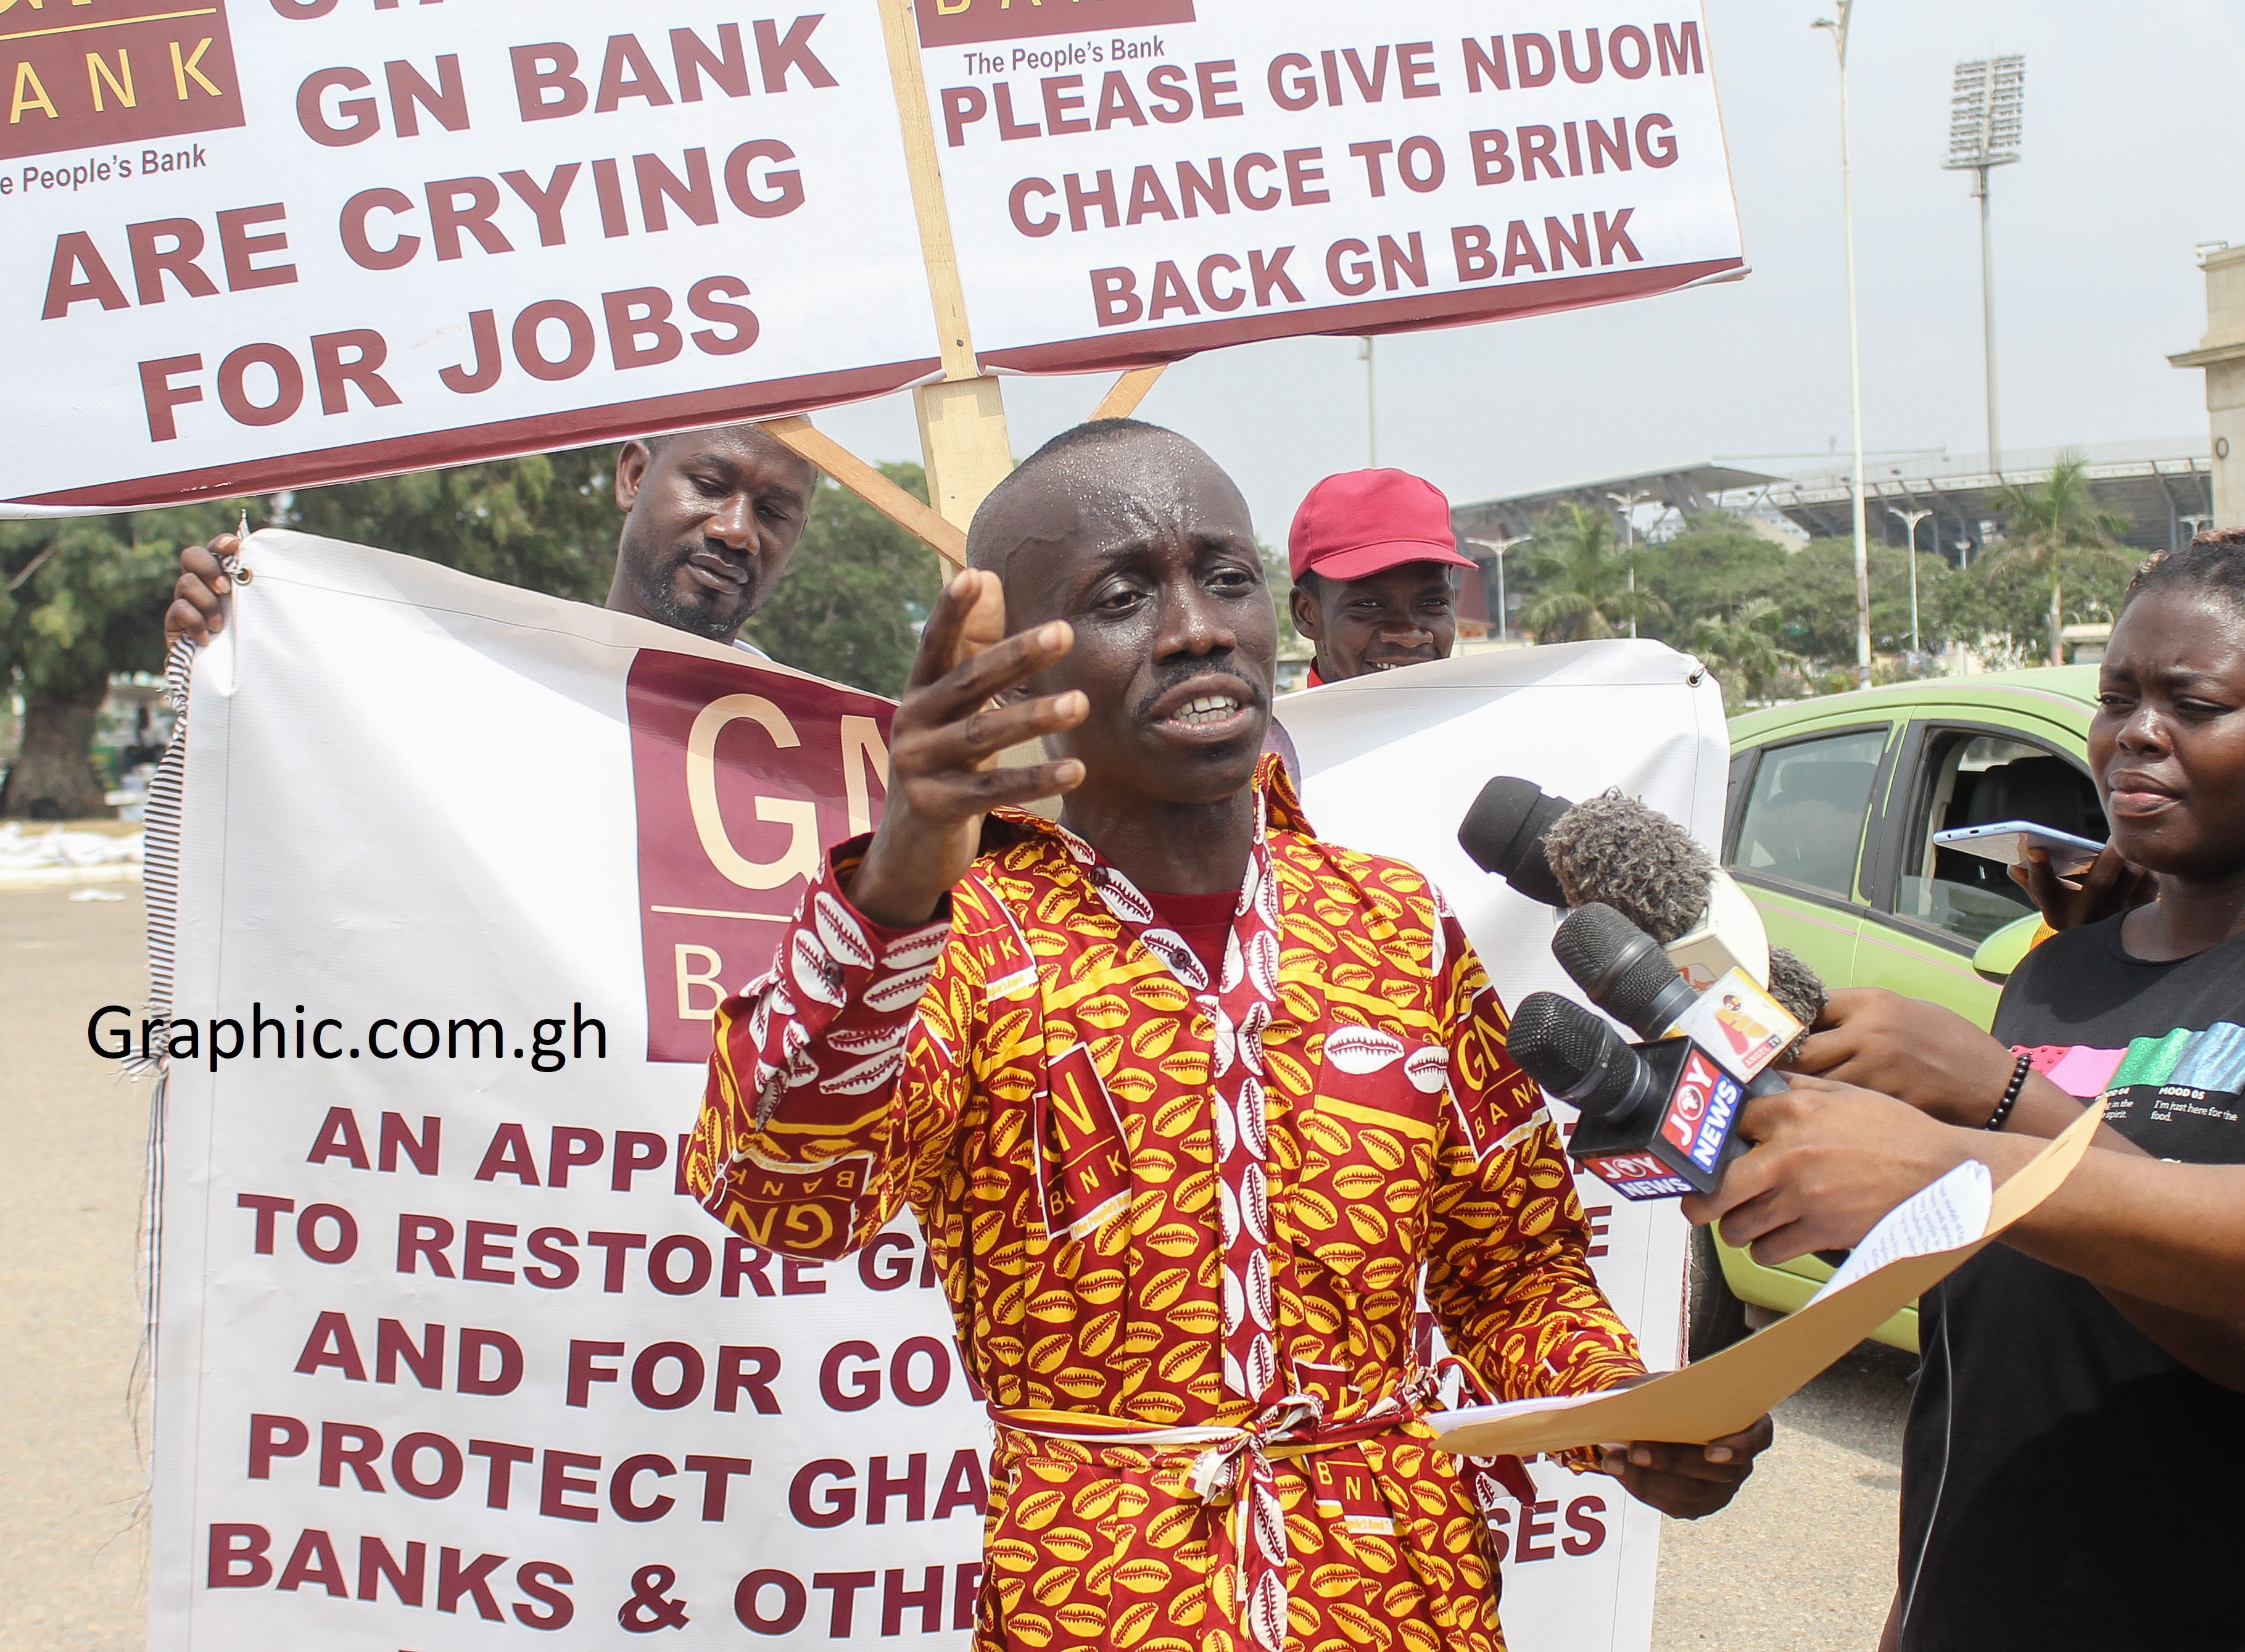 Former GN employee stages protest: Petitions government to relicense bank  